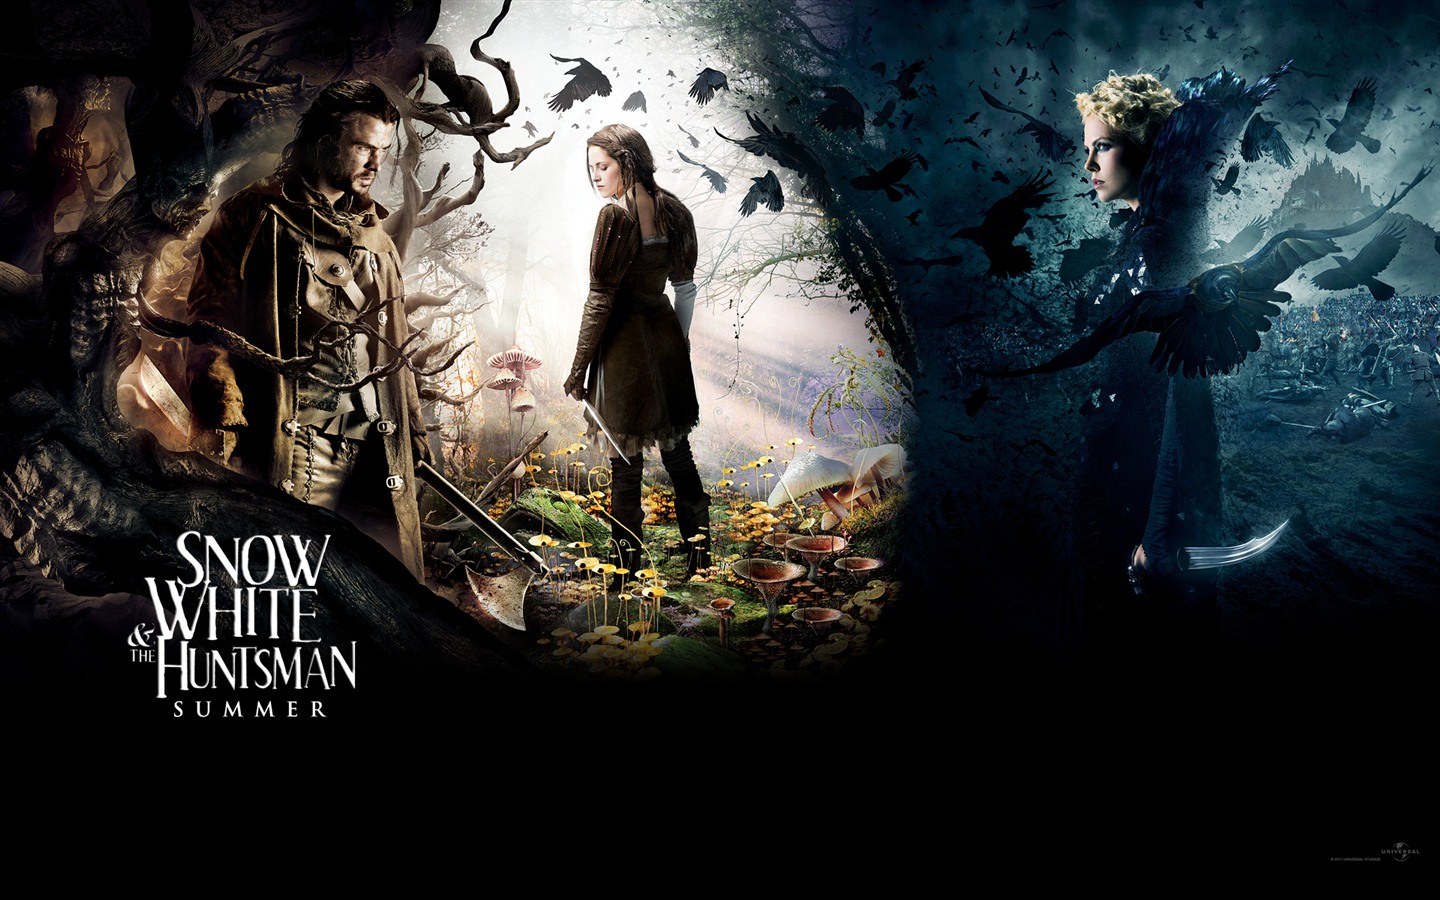 Snow White and the Huntsman HD wallpapers #4 - 1440x900